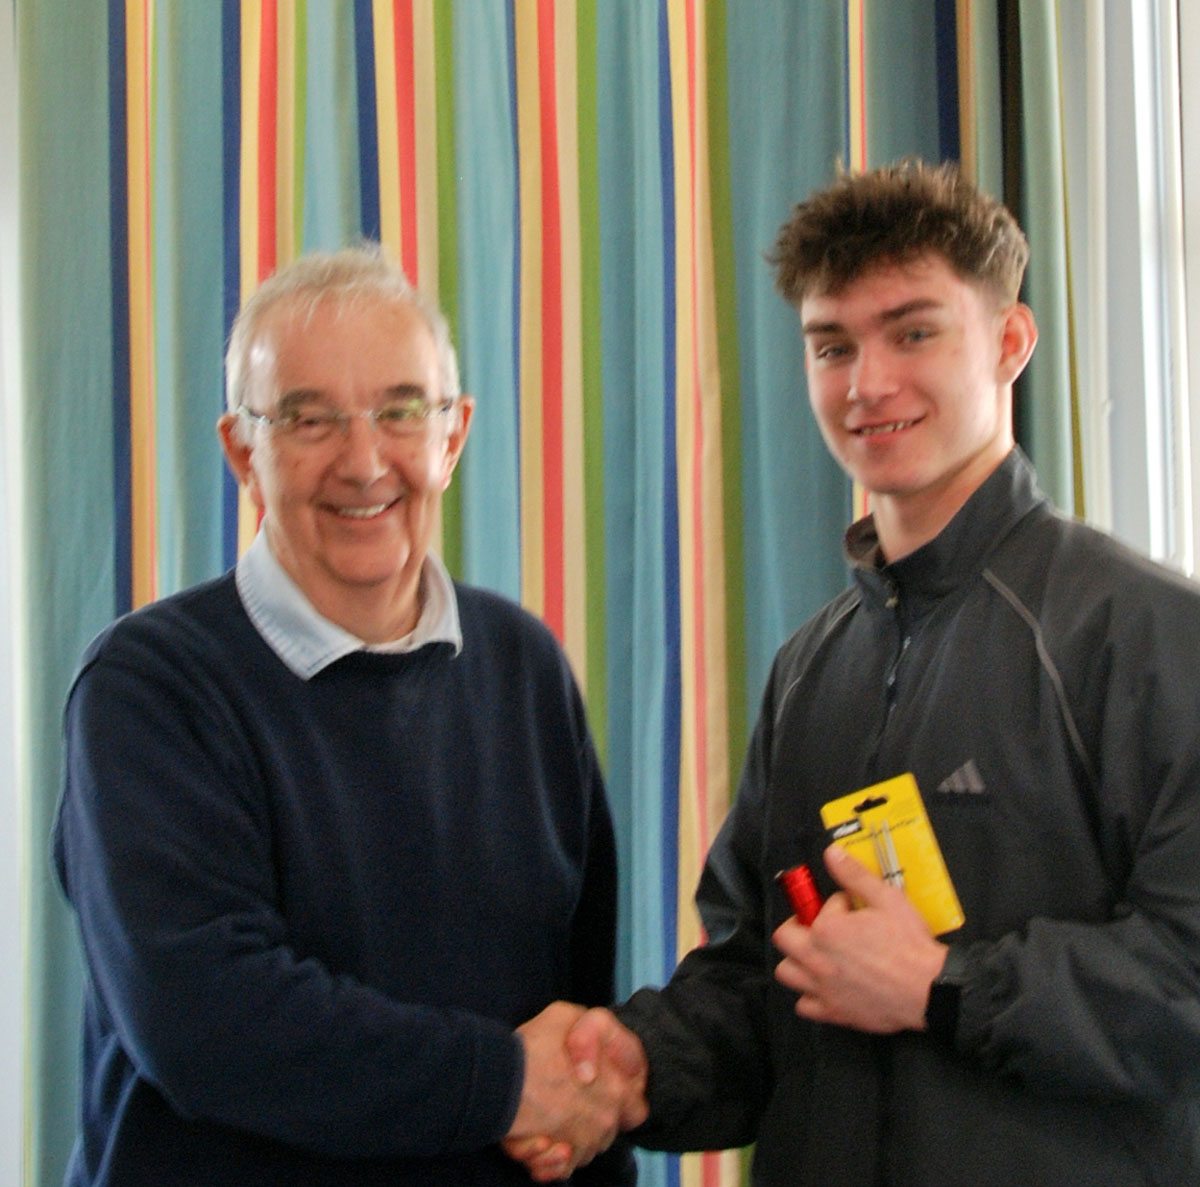 Vlad receiving the junior prize from Peter Mitchell